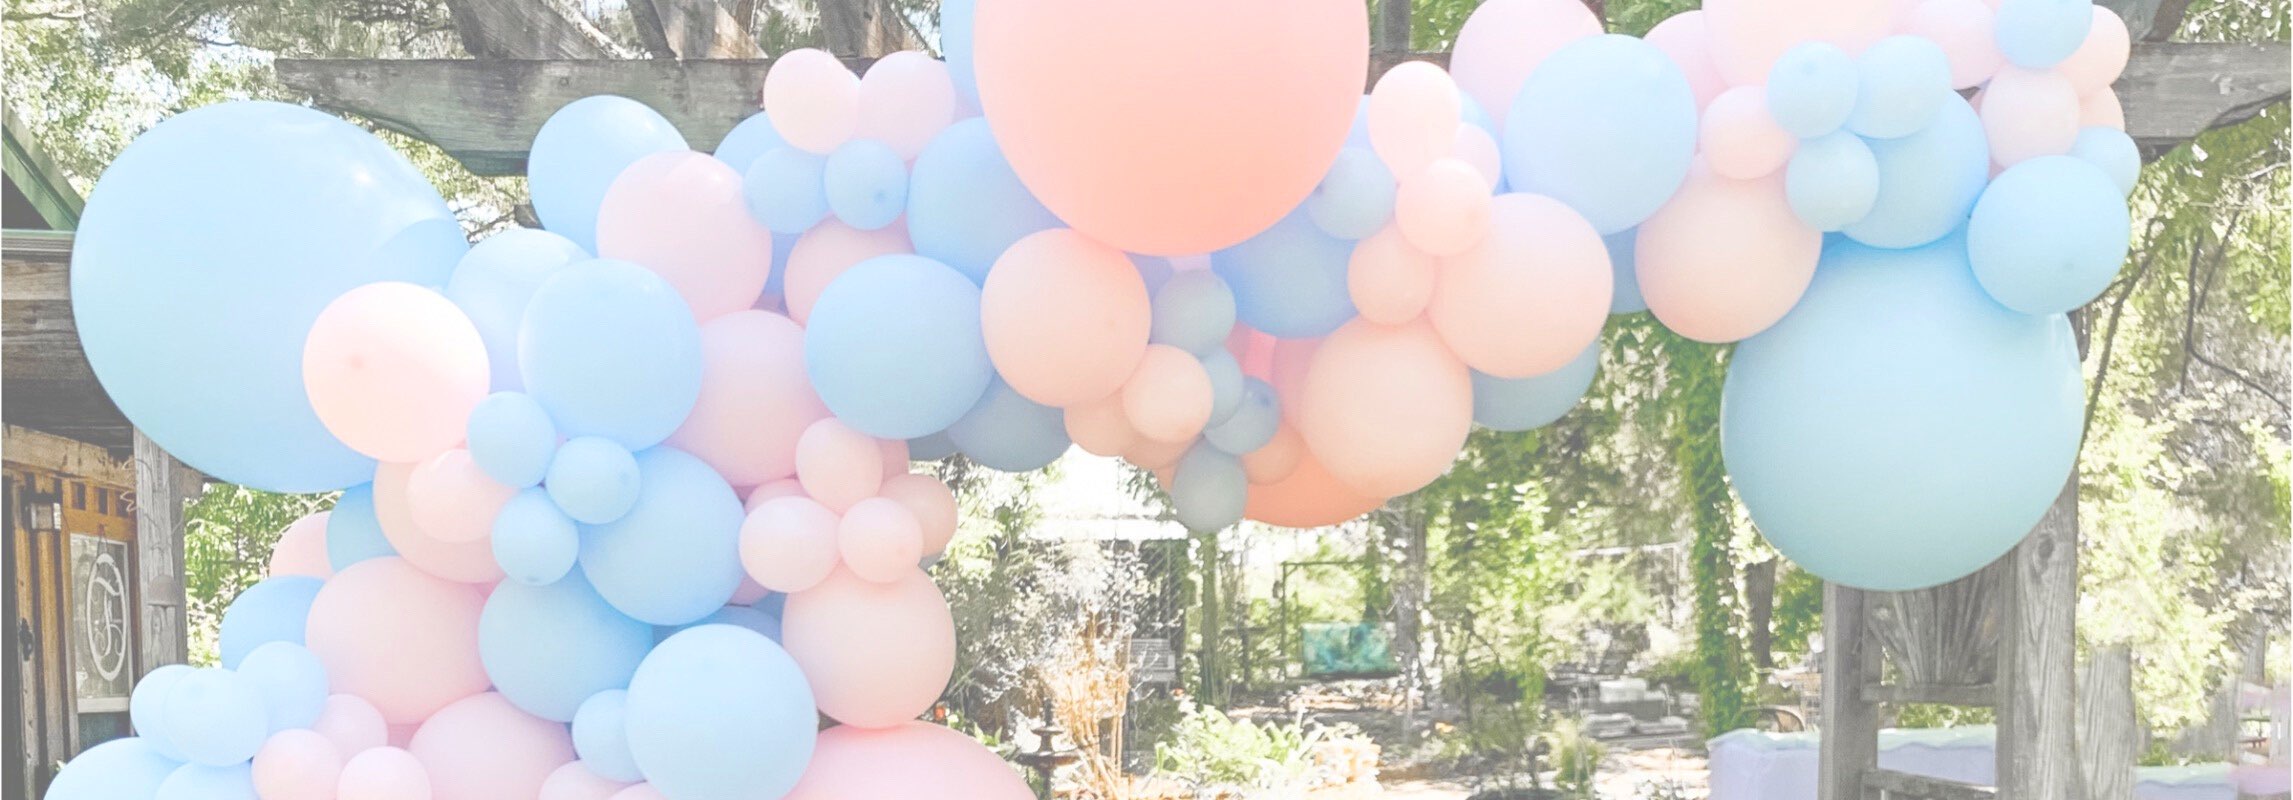 The Very Best Balloon Blog: Wedding Balloons and the great outdoors!